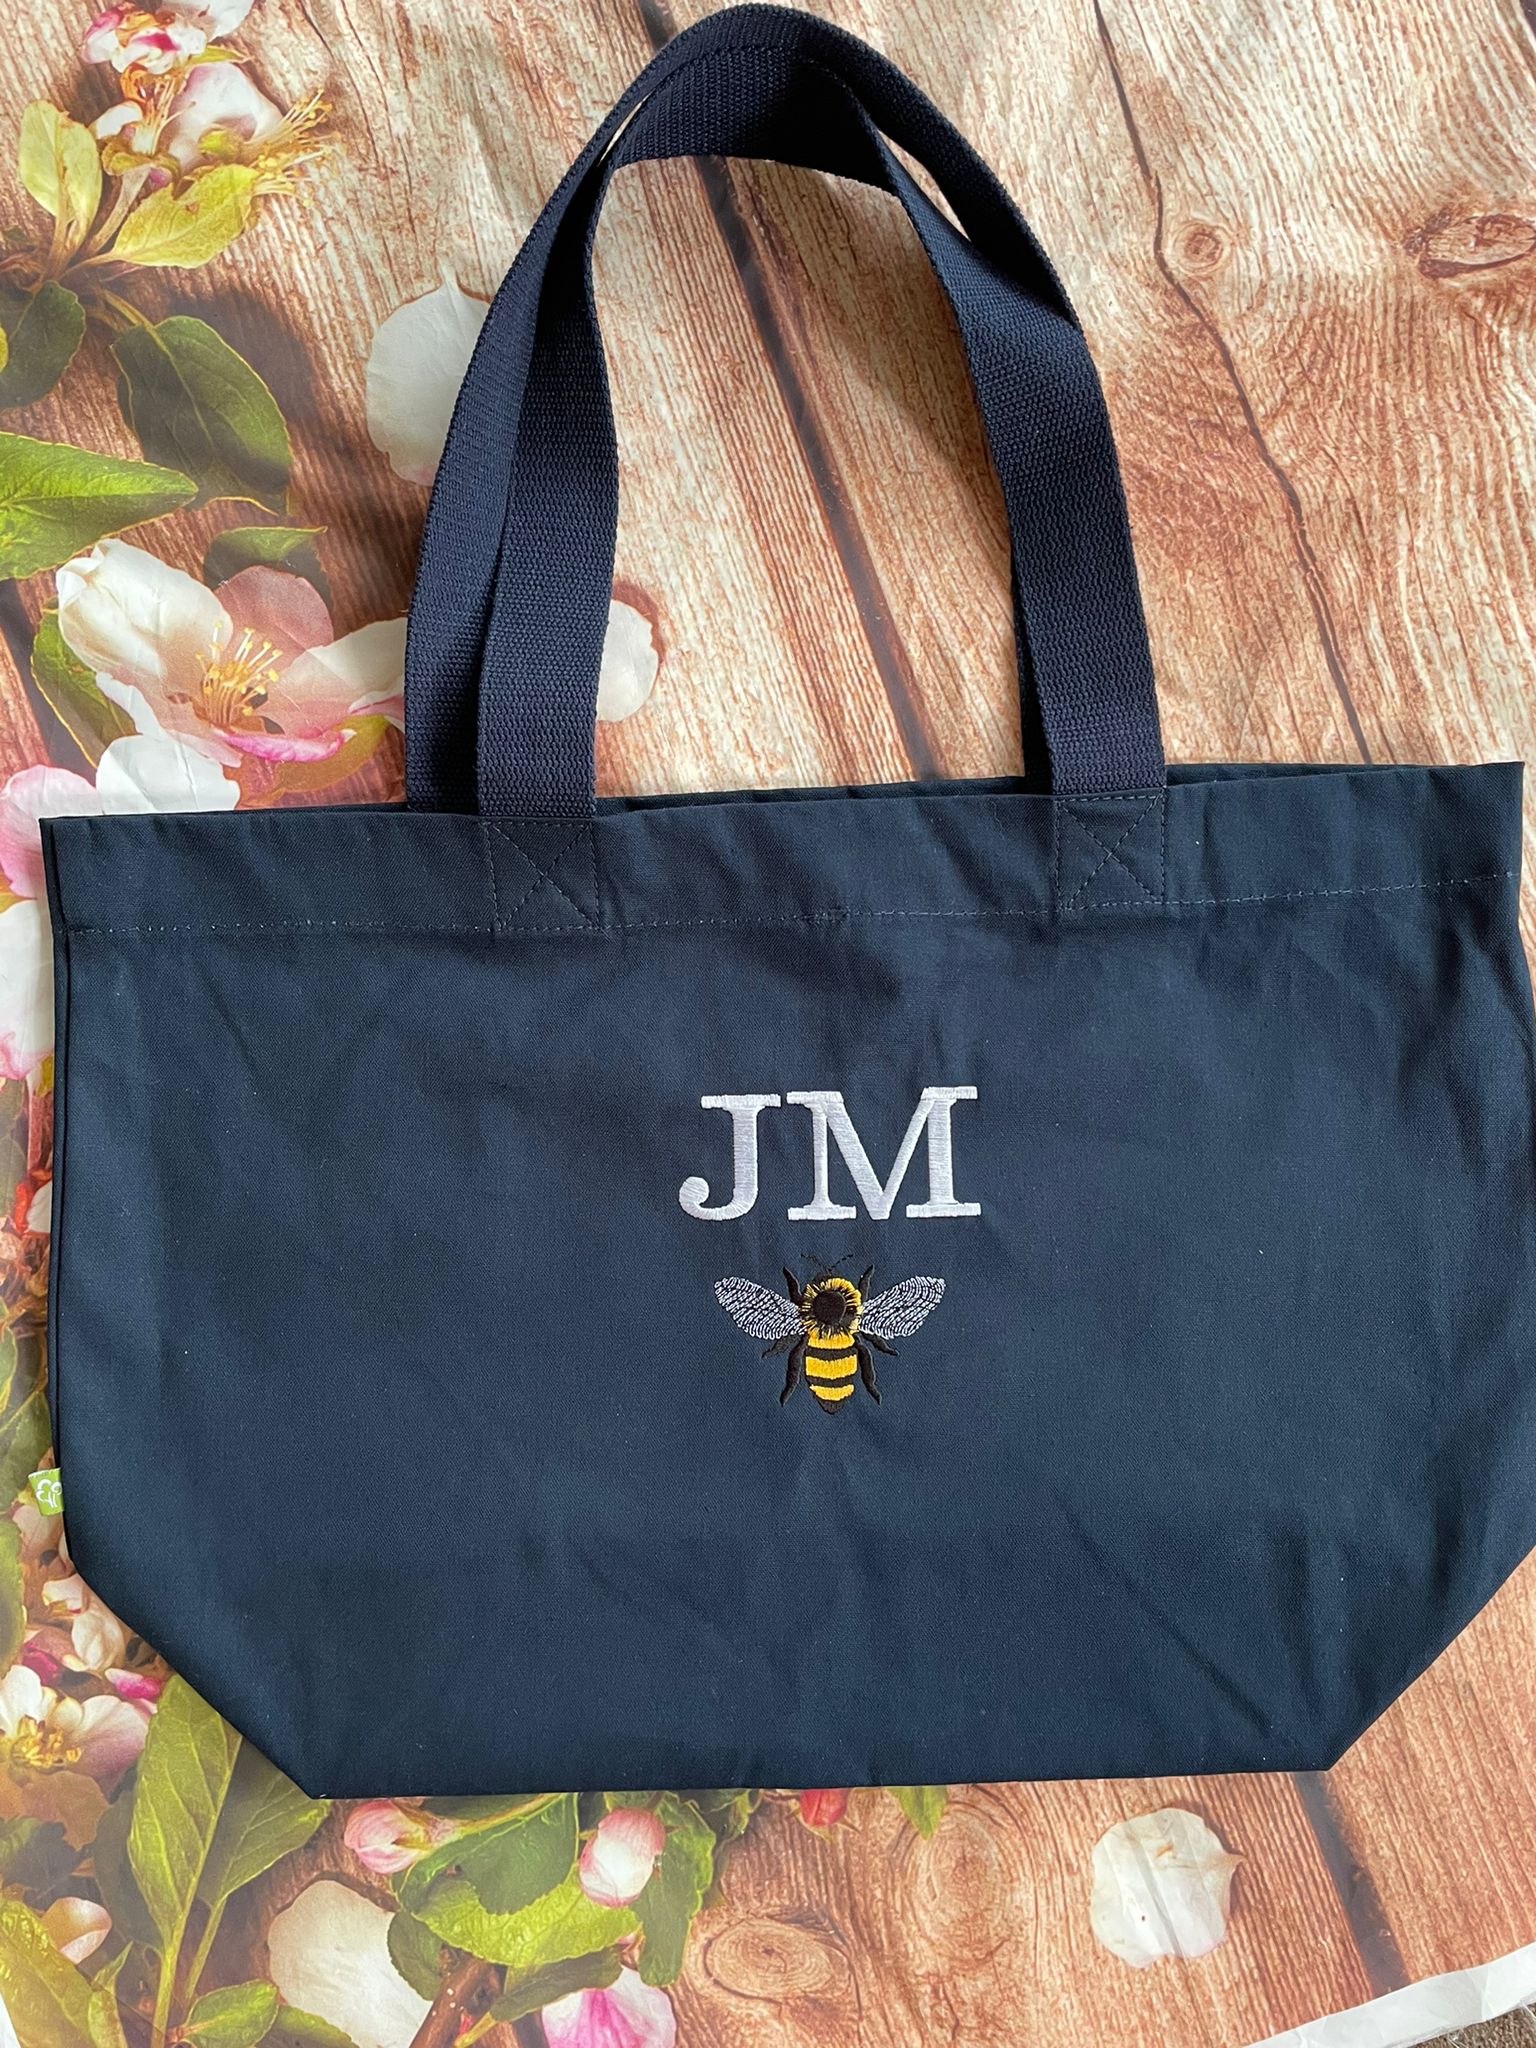 Initial Canvas Tote Bag With Zipper Pocket Embroidery Monogrammed